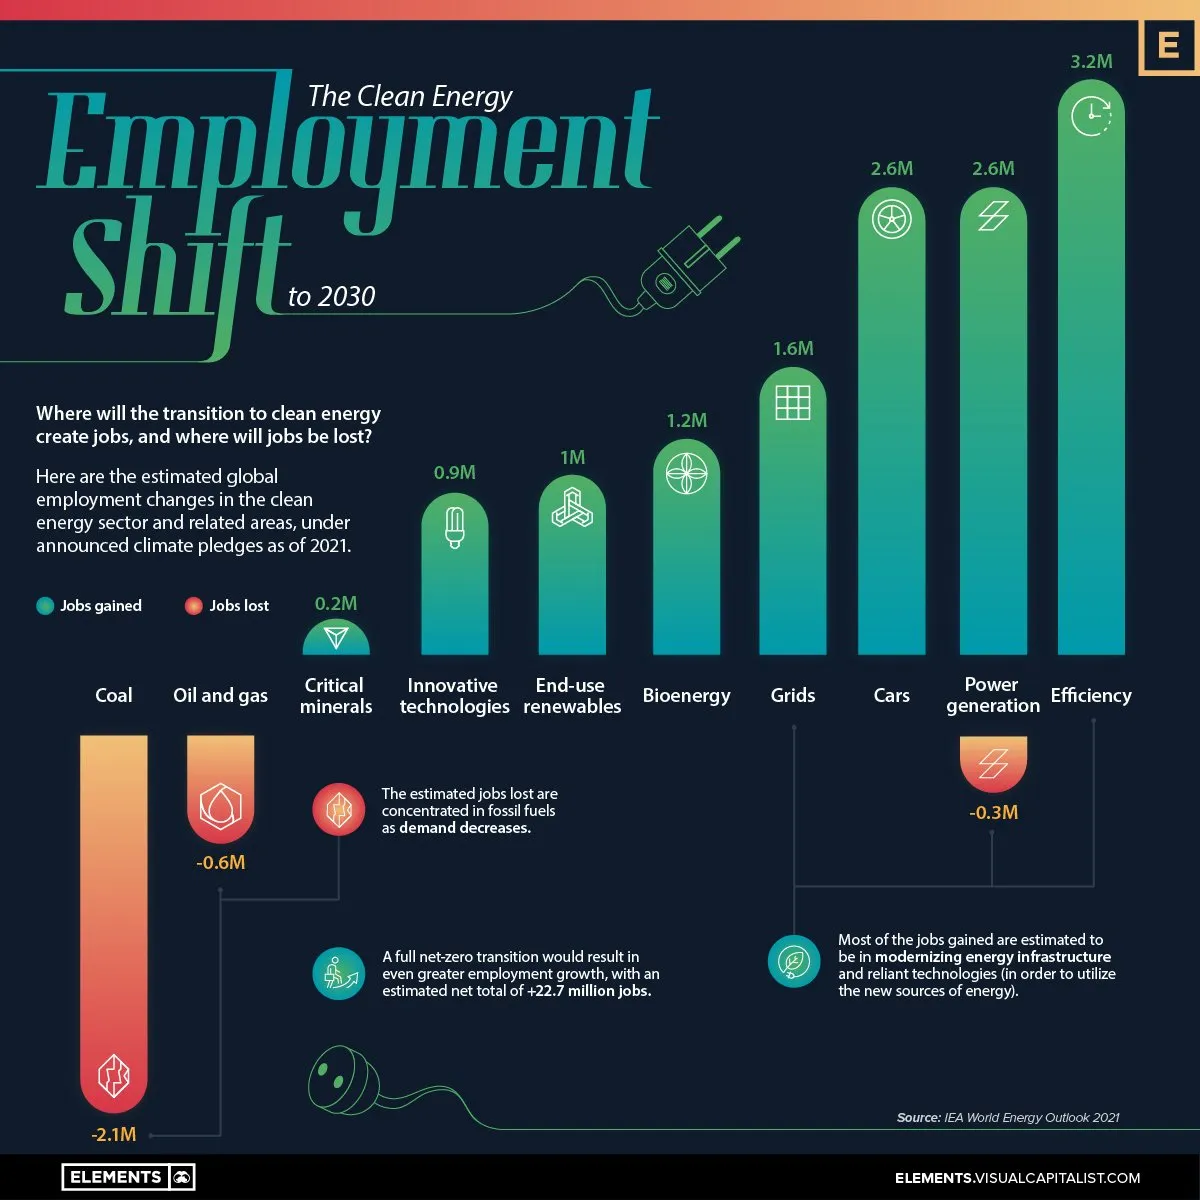 Infographic showing that job creation in renewable energy will outpace the jobs lost in fossil fuel industries